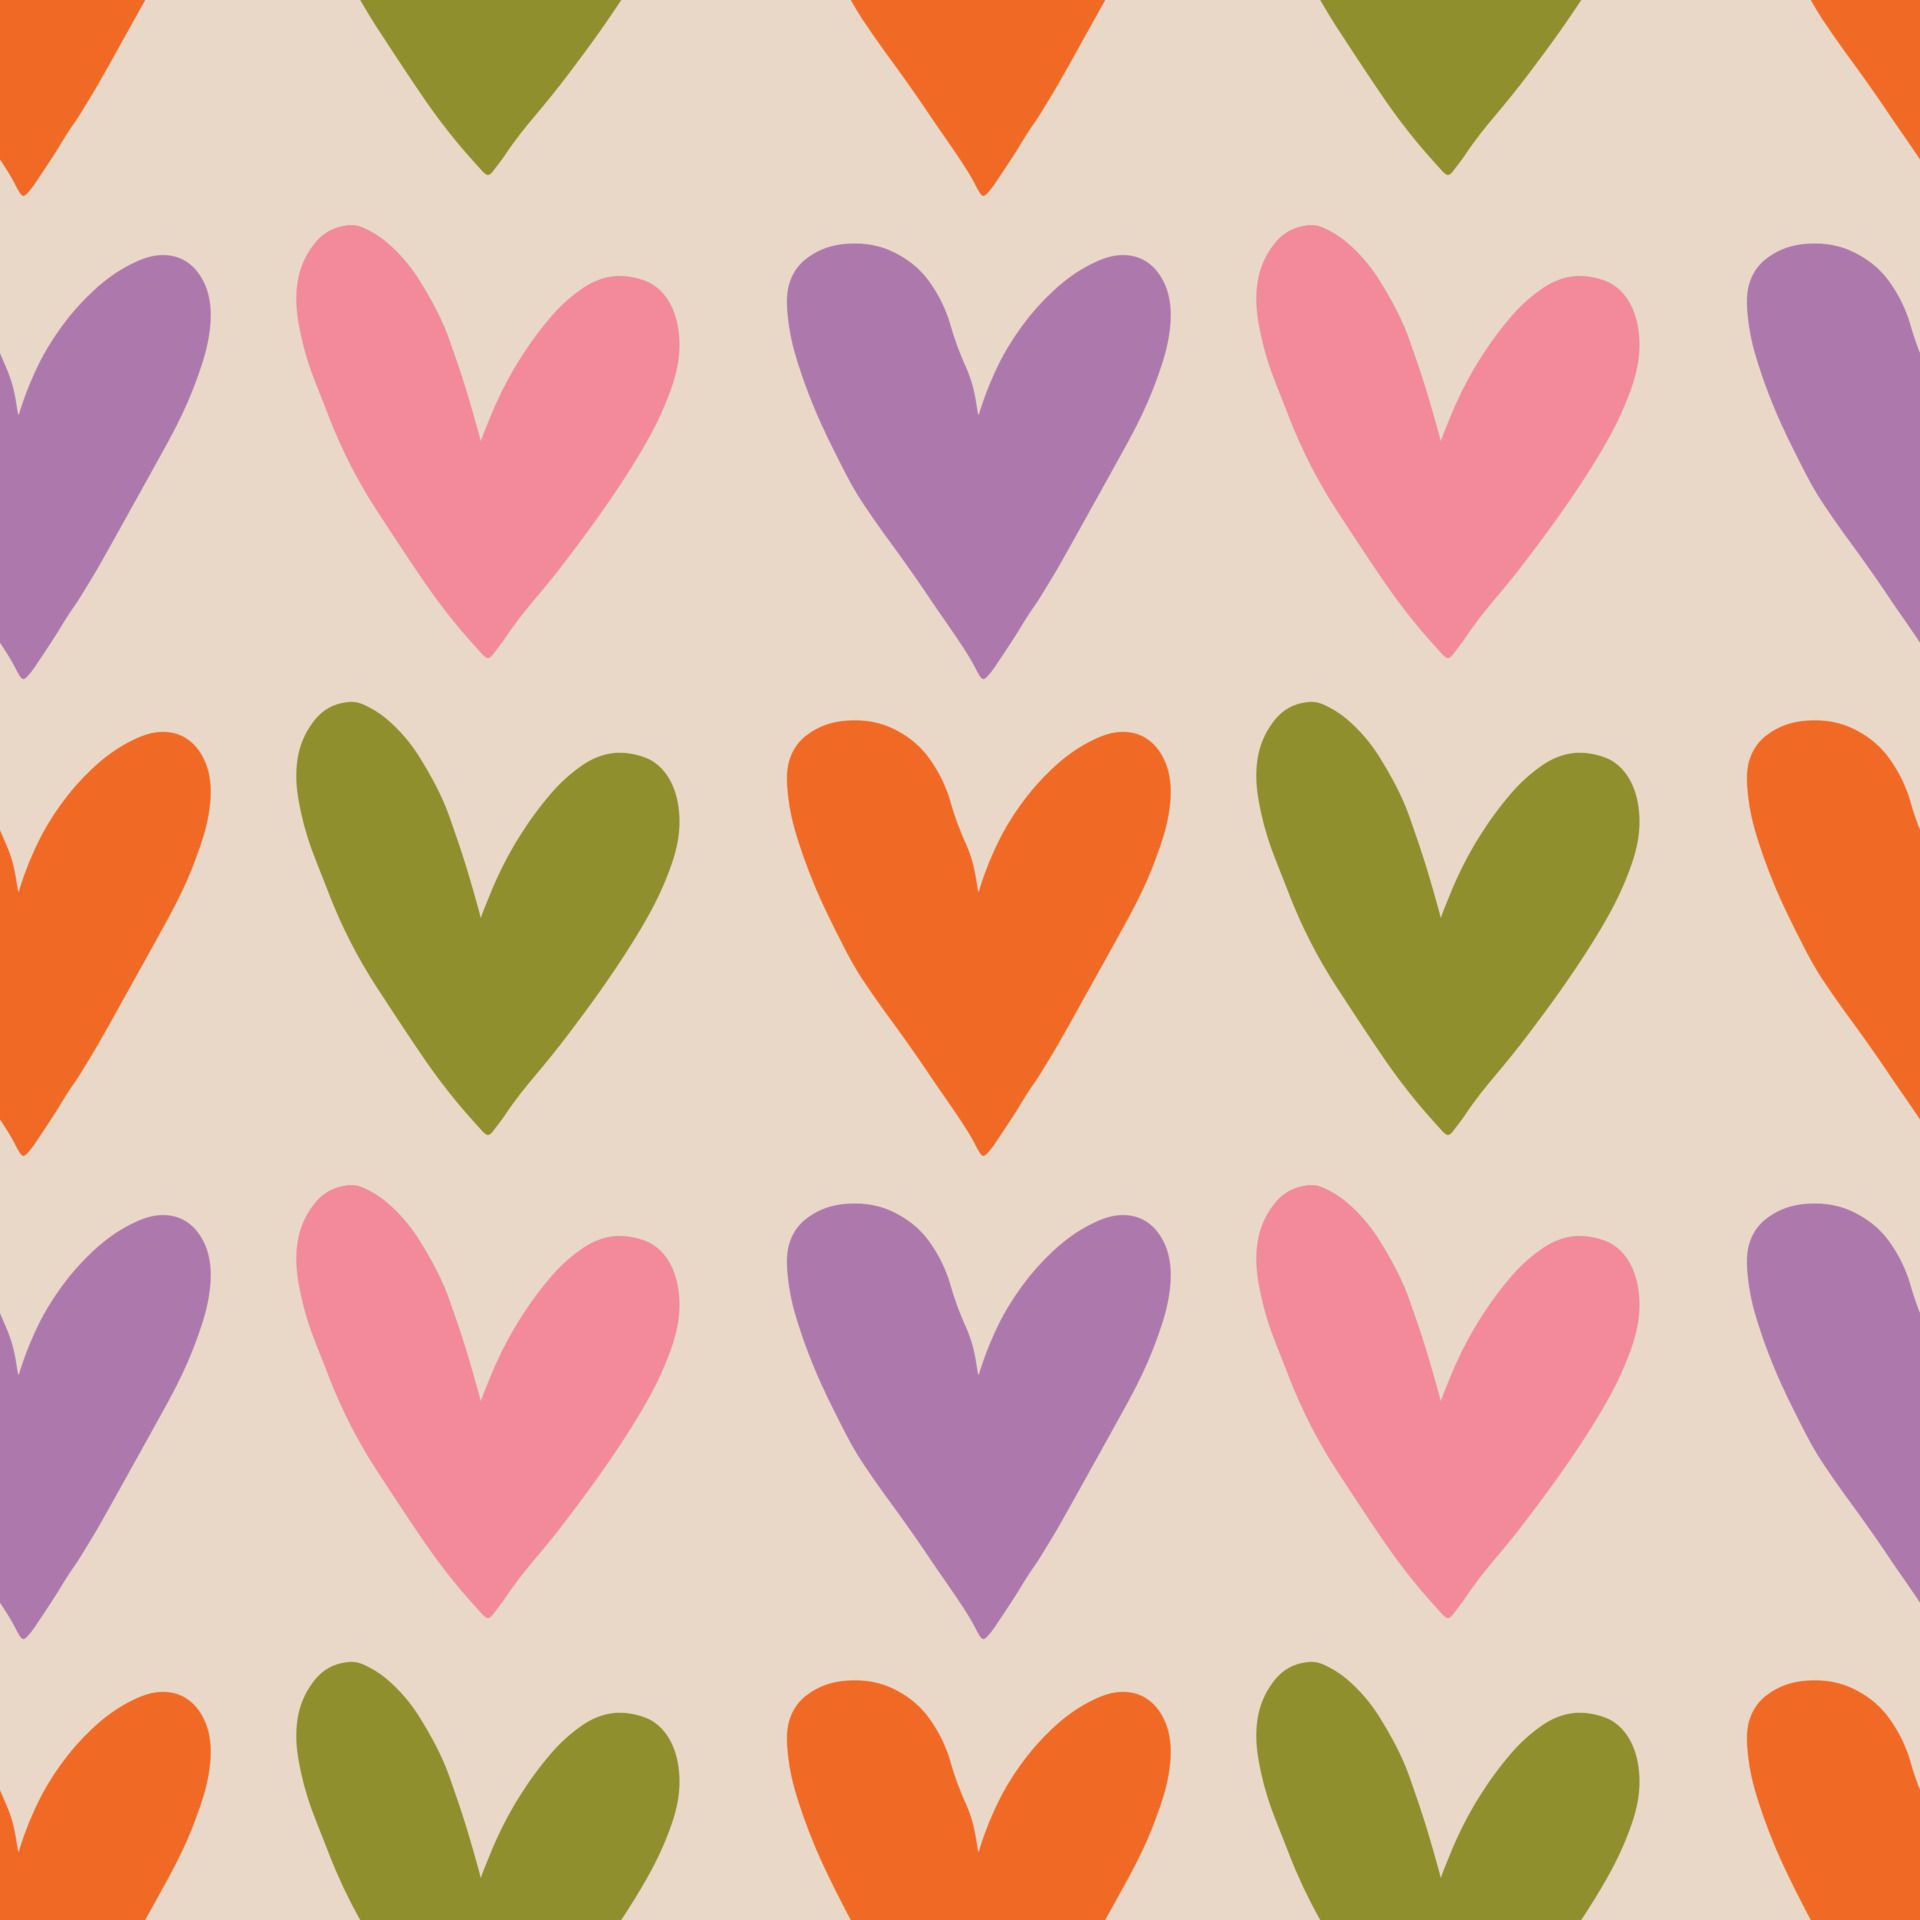 Aesthetic Retro Romantic printable groovy hearts seamless pattern. Decorative Hippie Naive 60's, 70's style Vintage modern background in minimalist style for fabric, wallpaper or wrapping